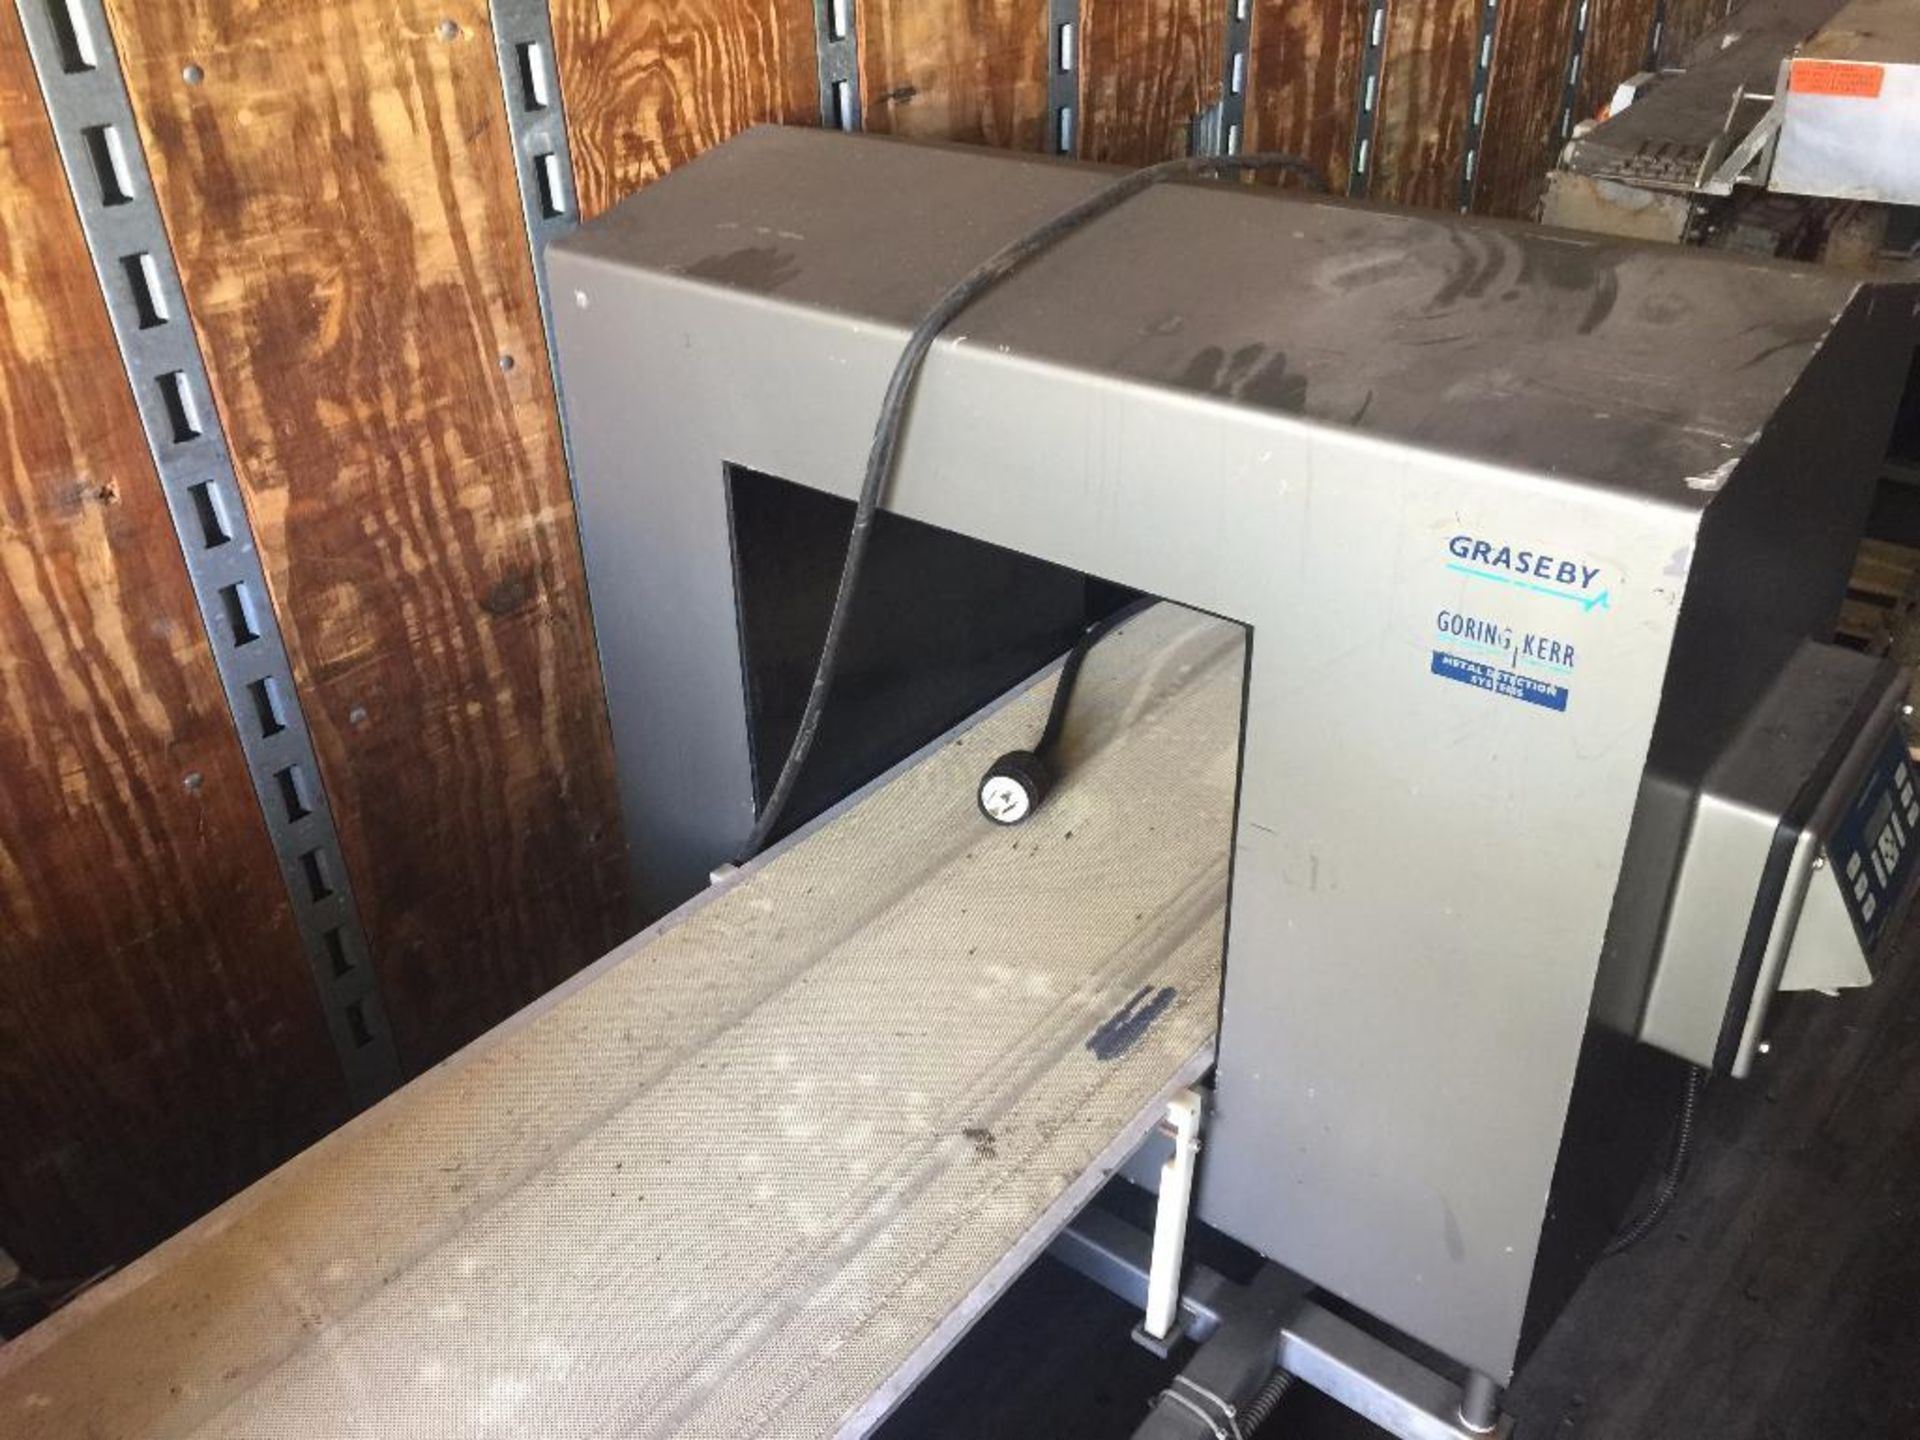 Graseby case metal detector, 22 in. x 17 in. tall, with conveyor. - ** Located in Medina, New York *